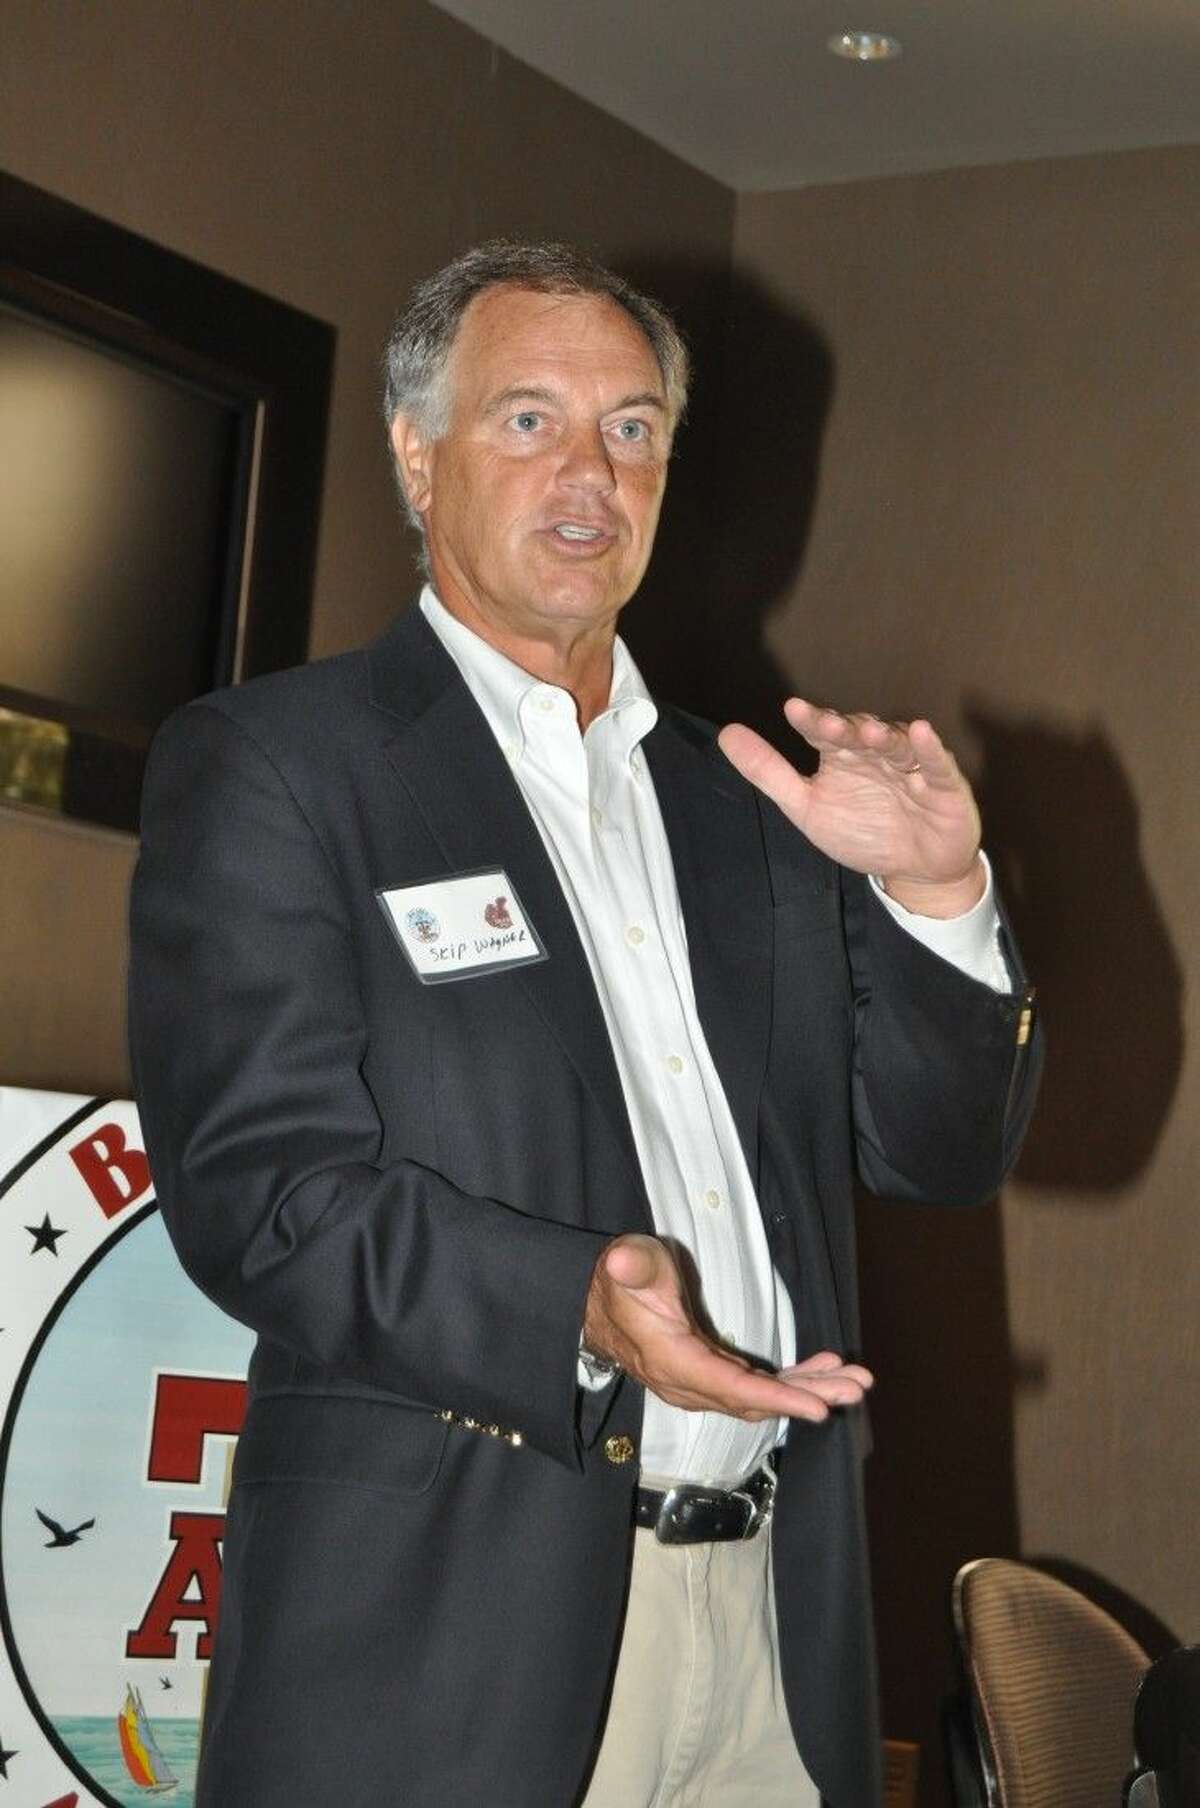 Skip Wagner President and CEO of the 12th Man Foundation was the speaker at the October Bay Area A&M Club. He gave an impressive presentation and slide show of the renovation of Kyle Field.